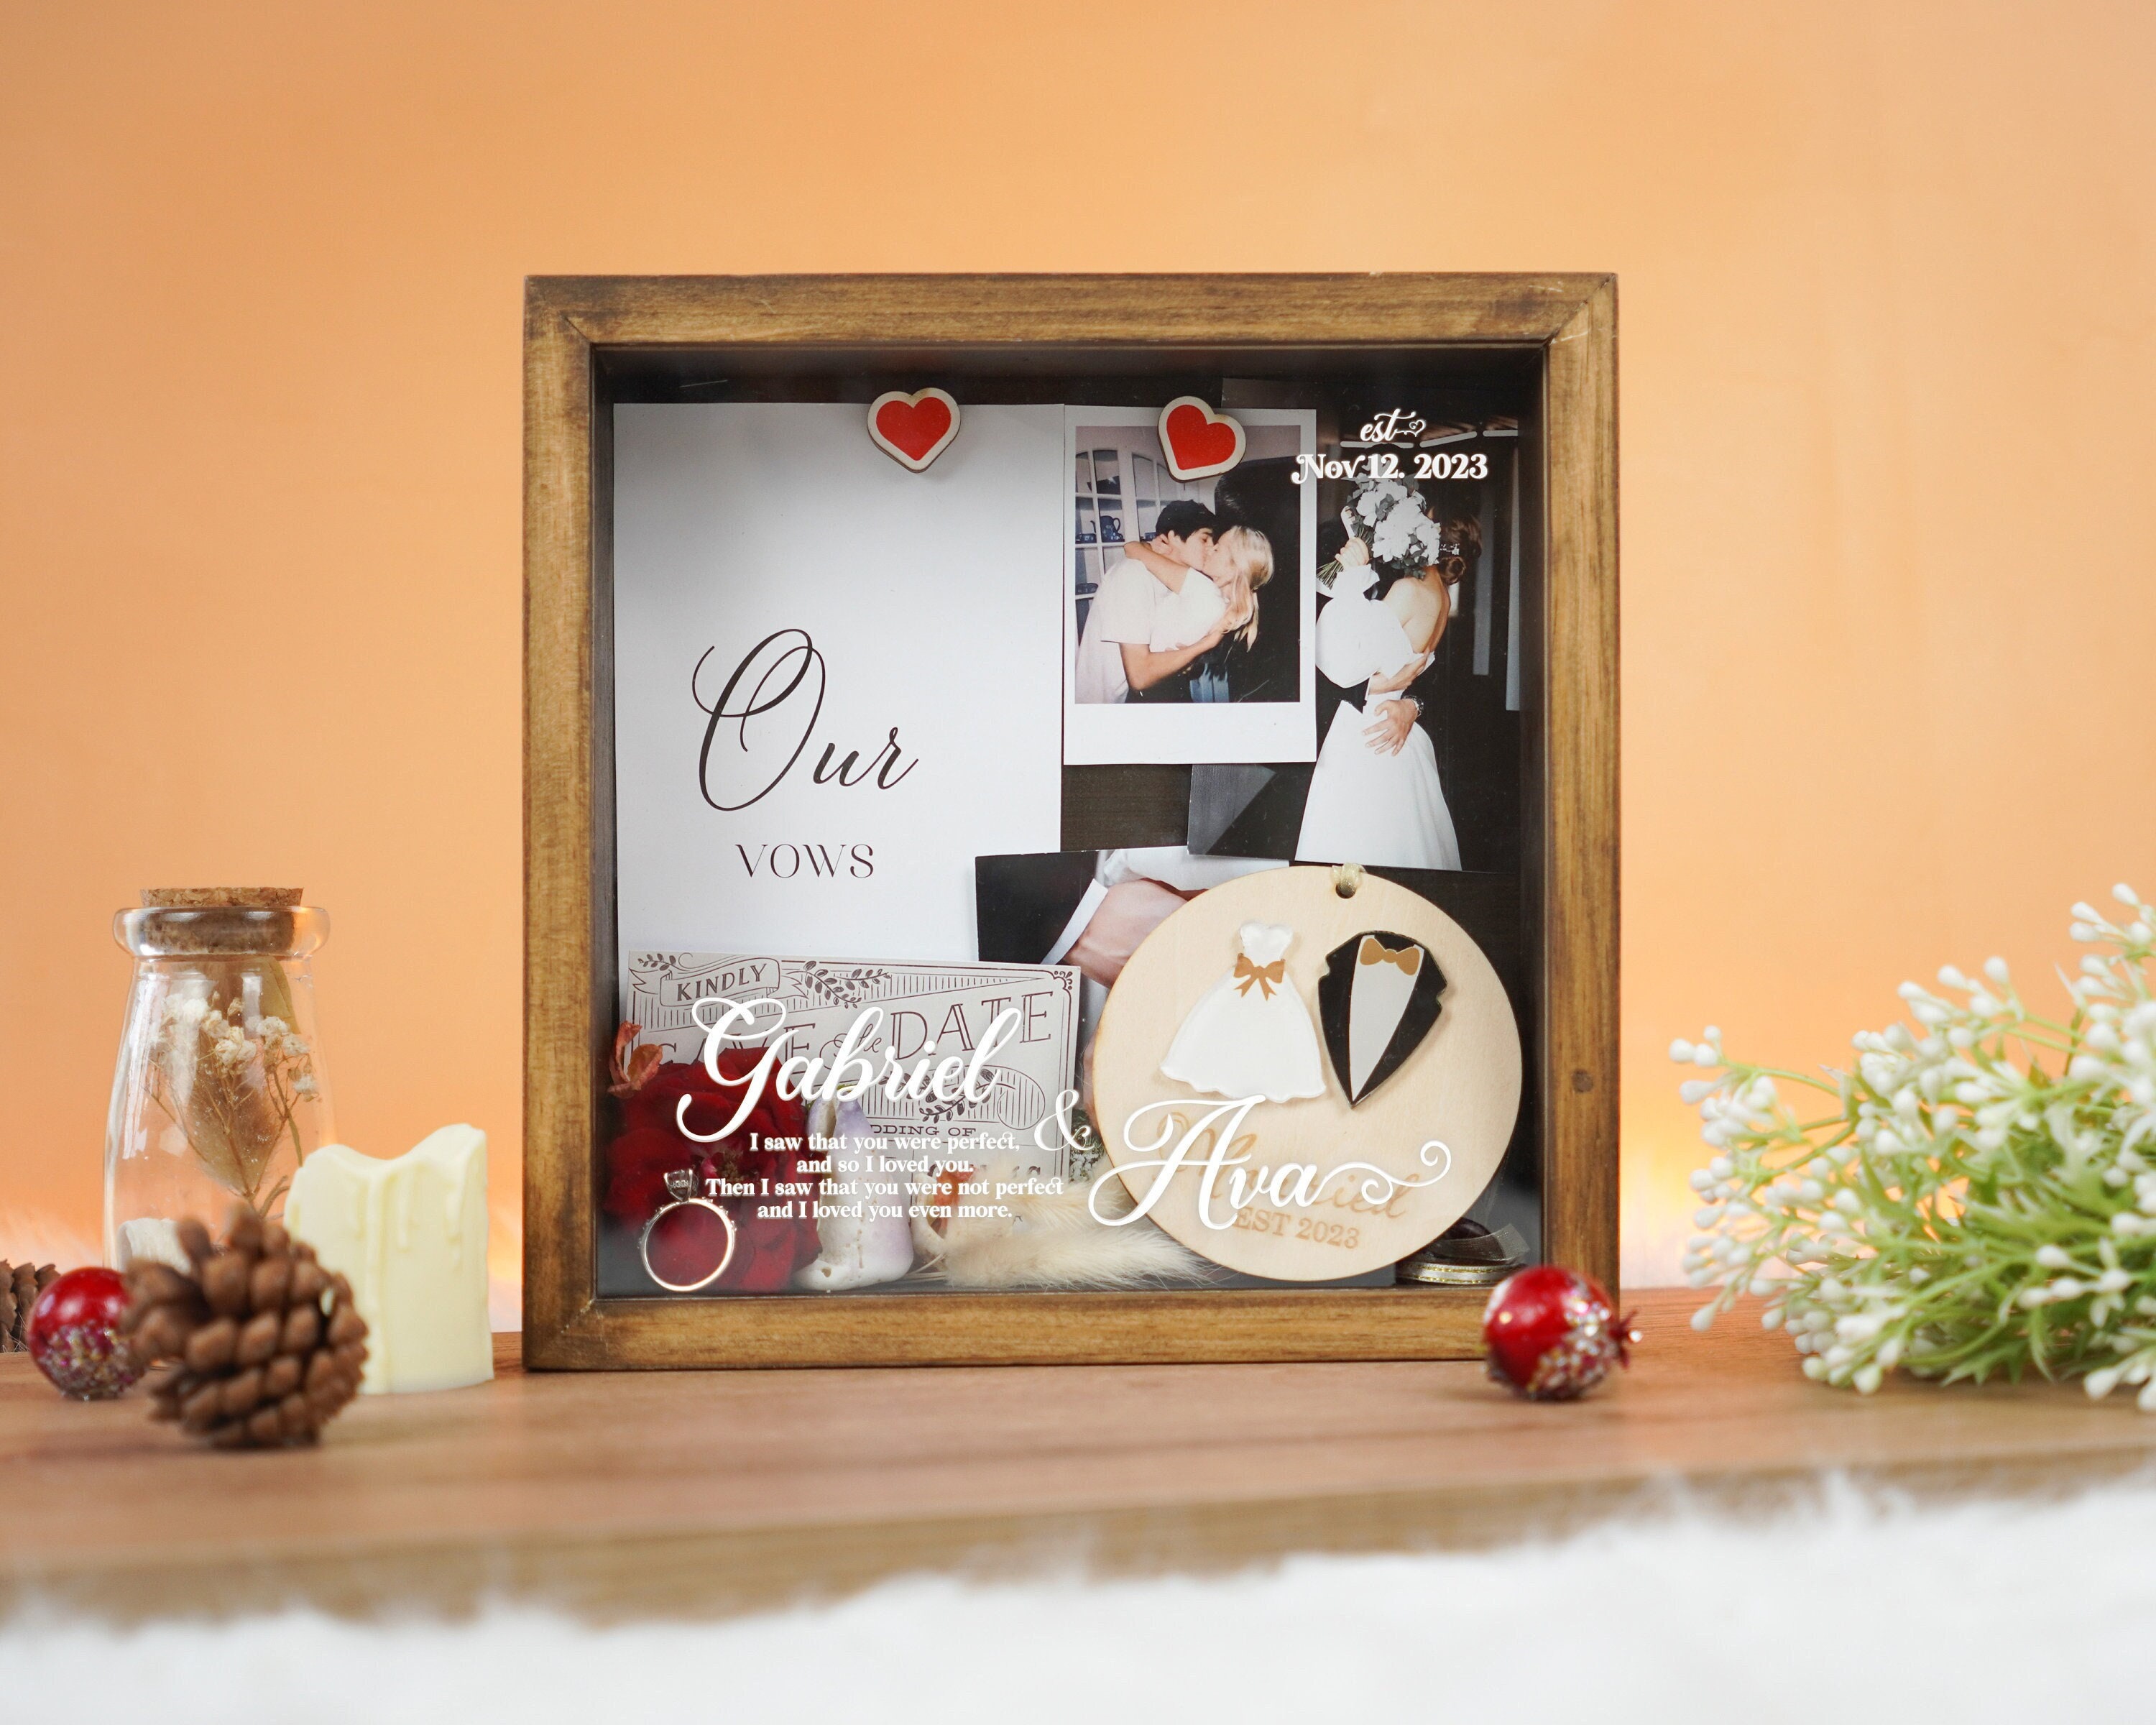 for Couples,Personalized Wedding Gifts, Keepsake Wedding Anniversary  Shadowbox Gift with The Couples Last Name and Date,Engagement Gifts for